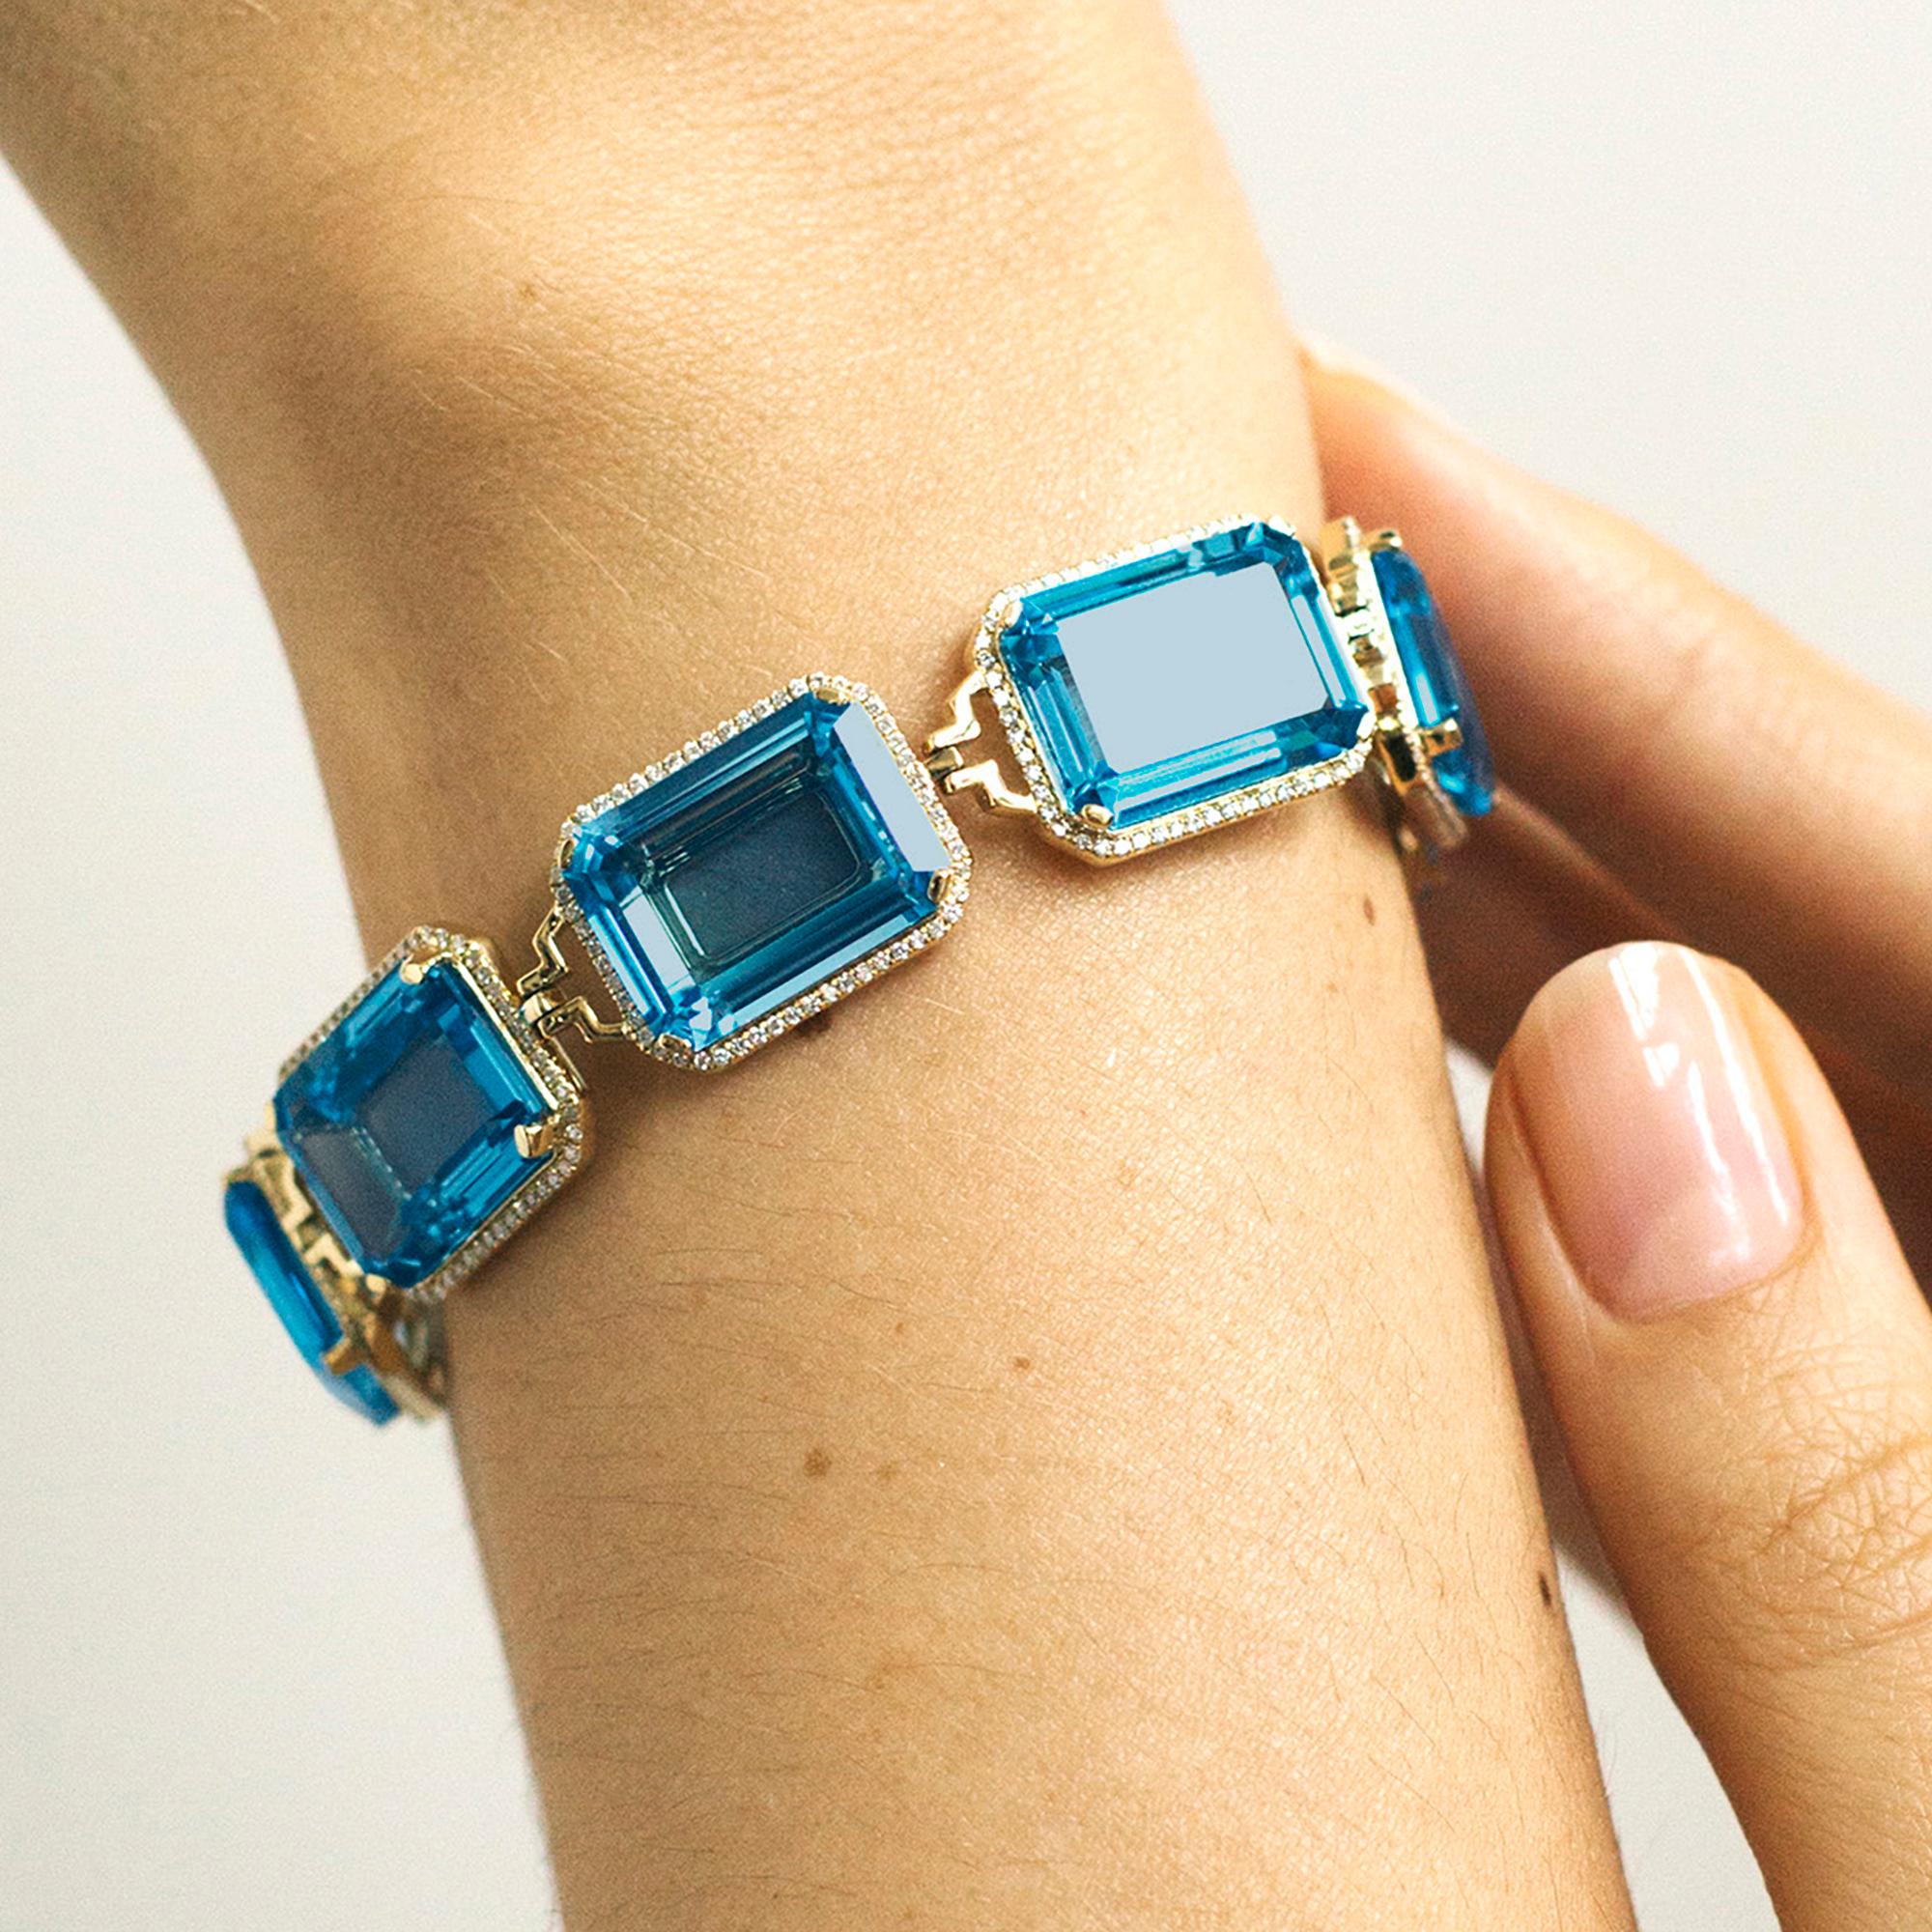 London Blue Topaz Emerald Cut Bracelet with Diamonds in 18K Yellow Gold, from 'Gossip' Collection

Bracelet Length: 6 3/4''

Stone Size: 16 x 12 mm 

Diamonds: G-H / VS, Approx Wt: 1.25 Cts

(The size can be adjusted as per request)



